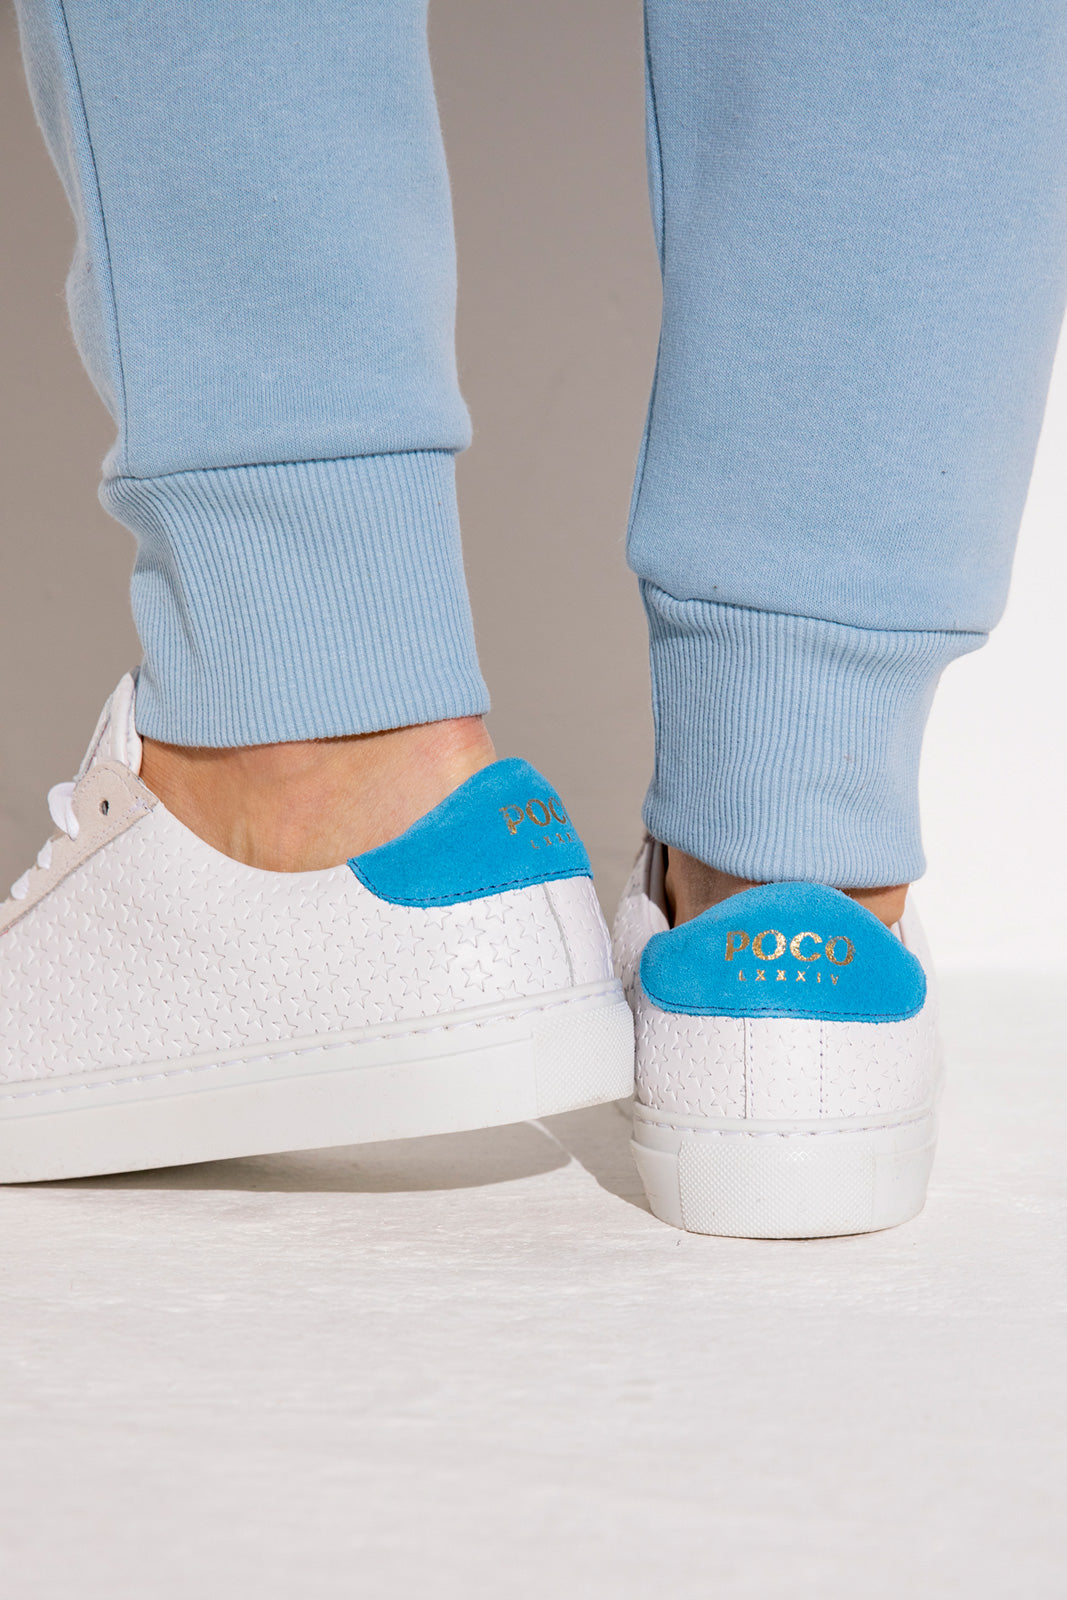 Lulu White & Blue Suede - Shoes - POCO by Pippa